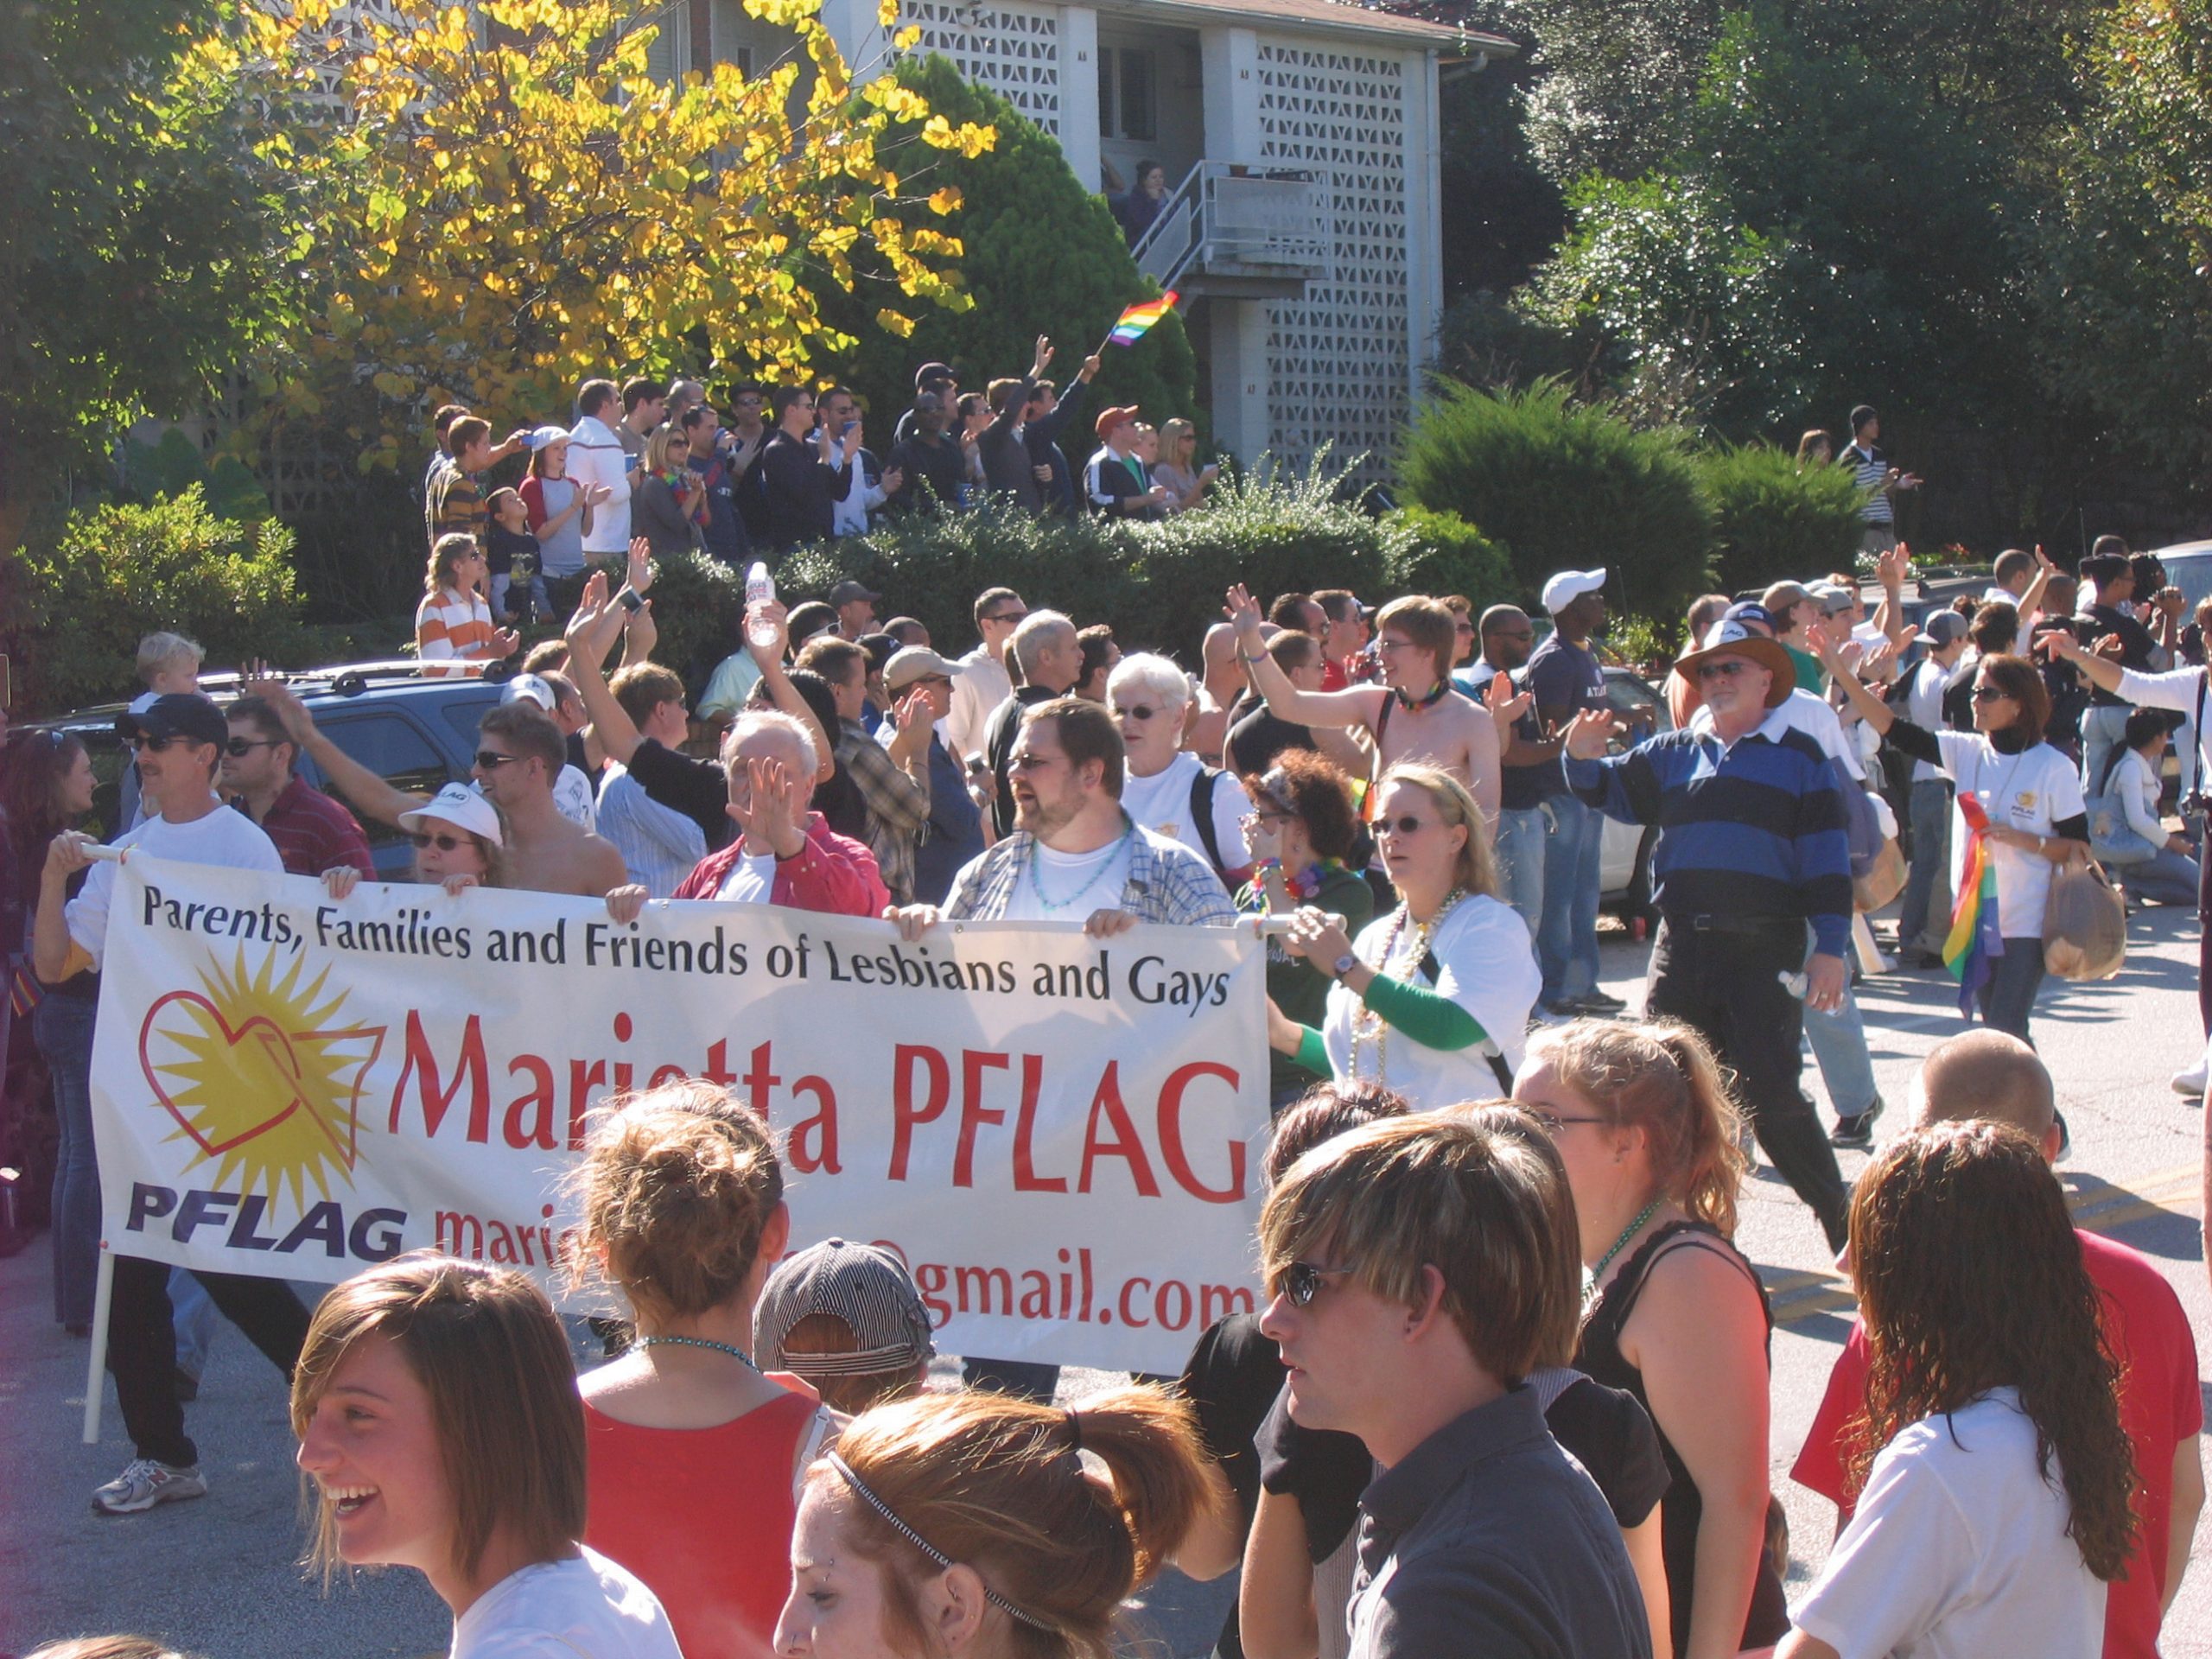 Photo of members of Marietta PFLAG marching in a parade